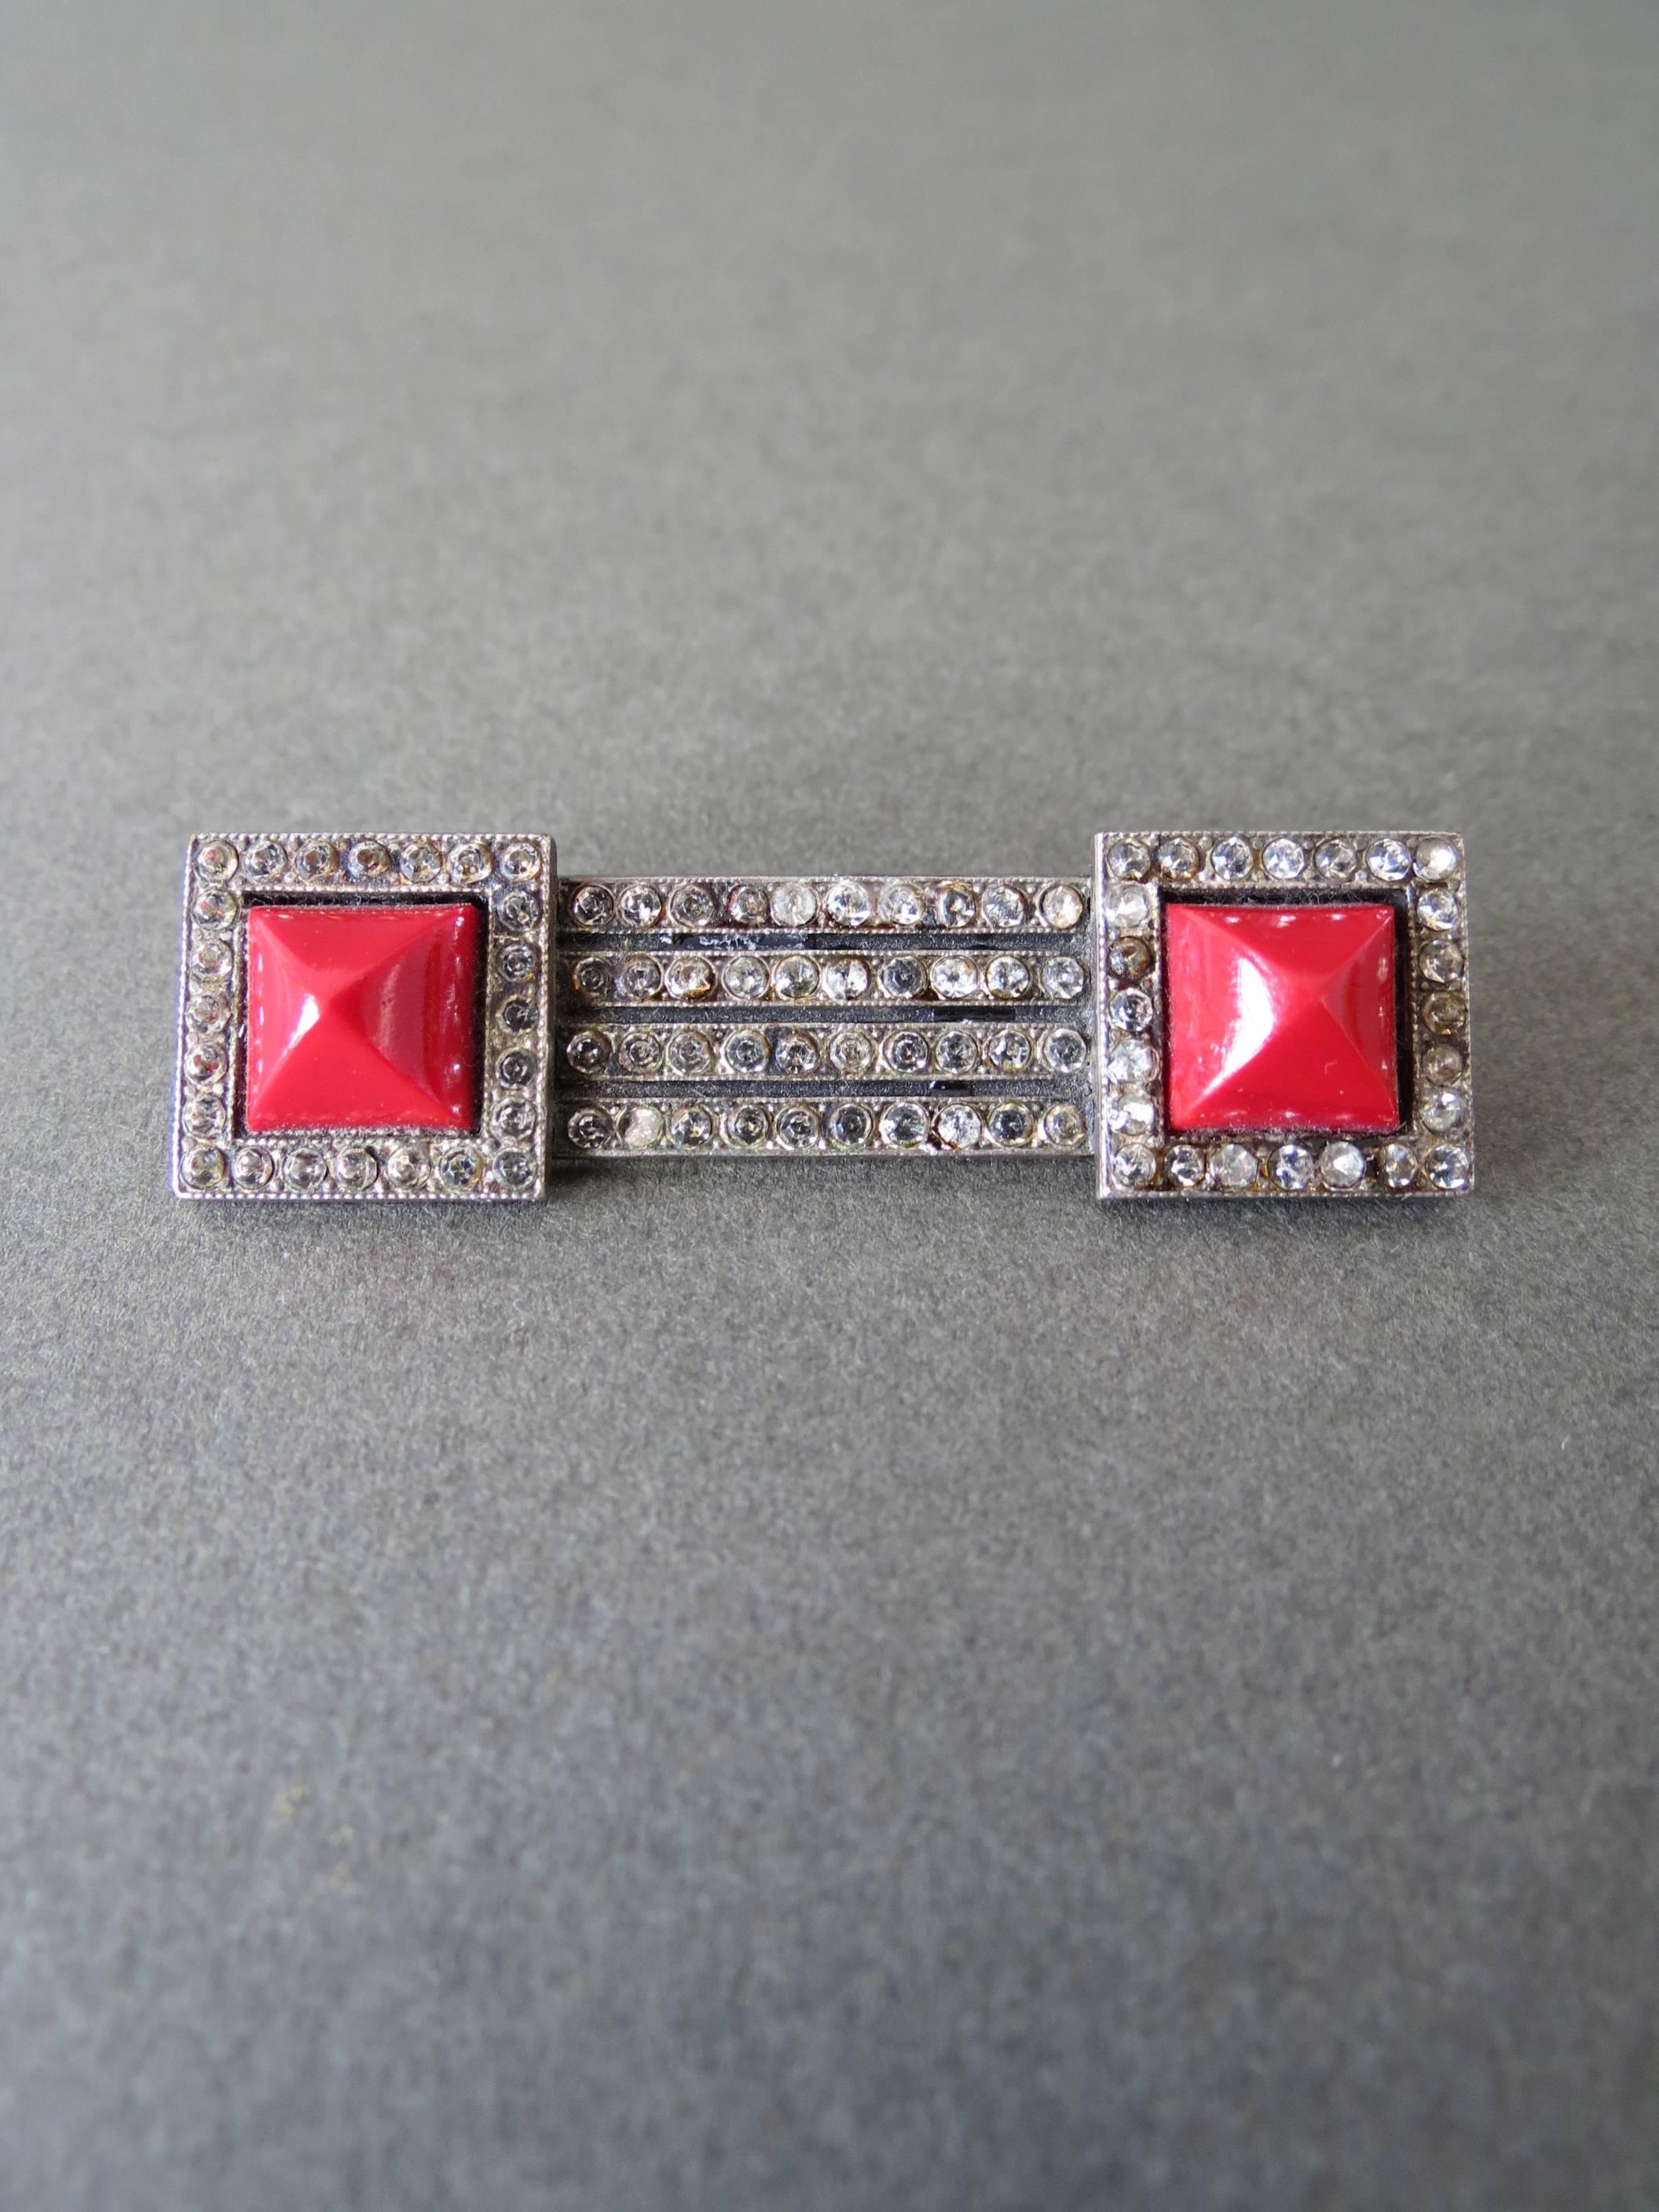 Vintage Art Deco Solid Silver Paste & Red glass Brooch.
Item Specifics
Length: 5.5cm (approx 2.00